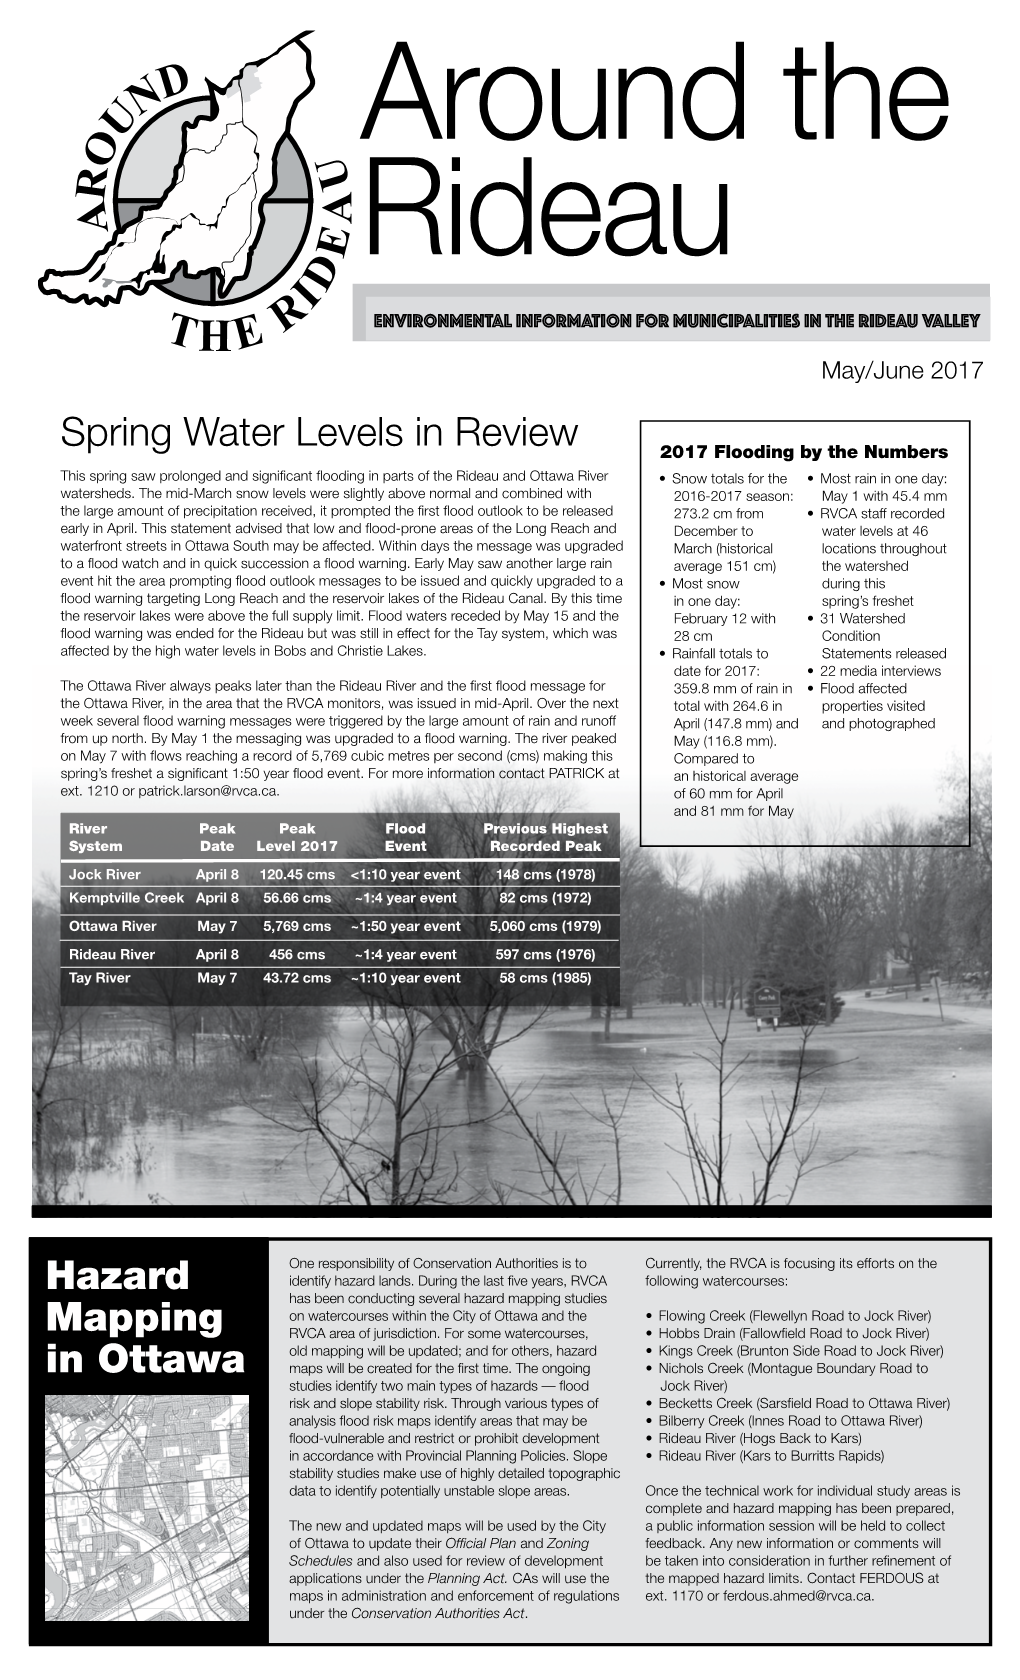 Spring Water Levels in Review Hazard Mapping in Ottawa